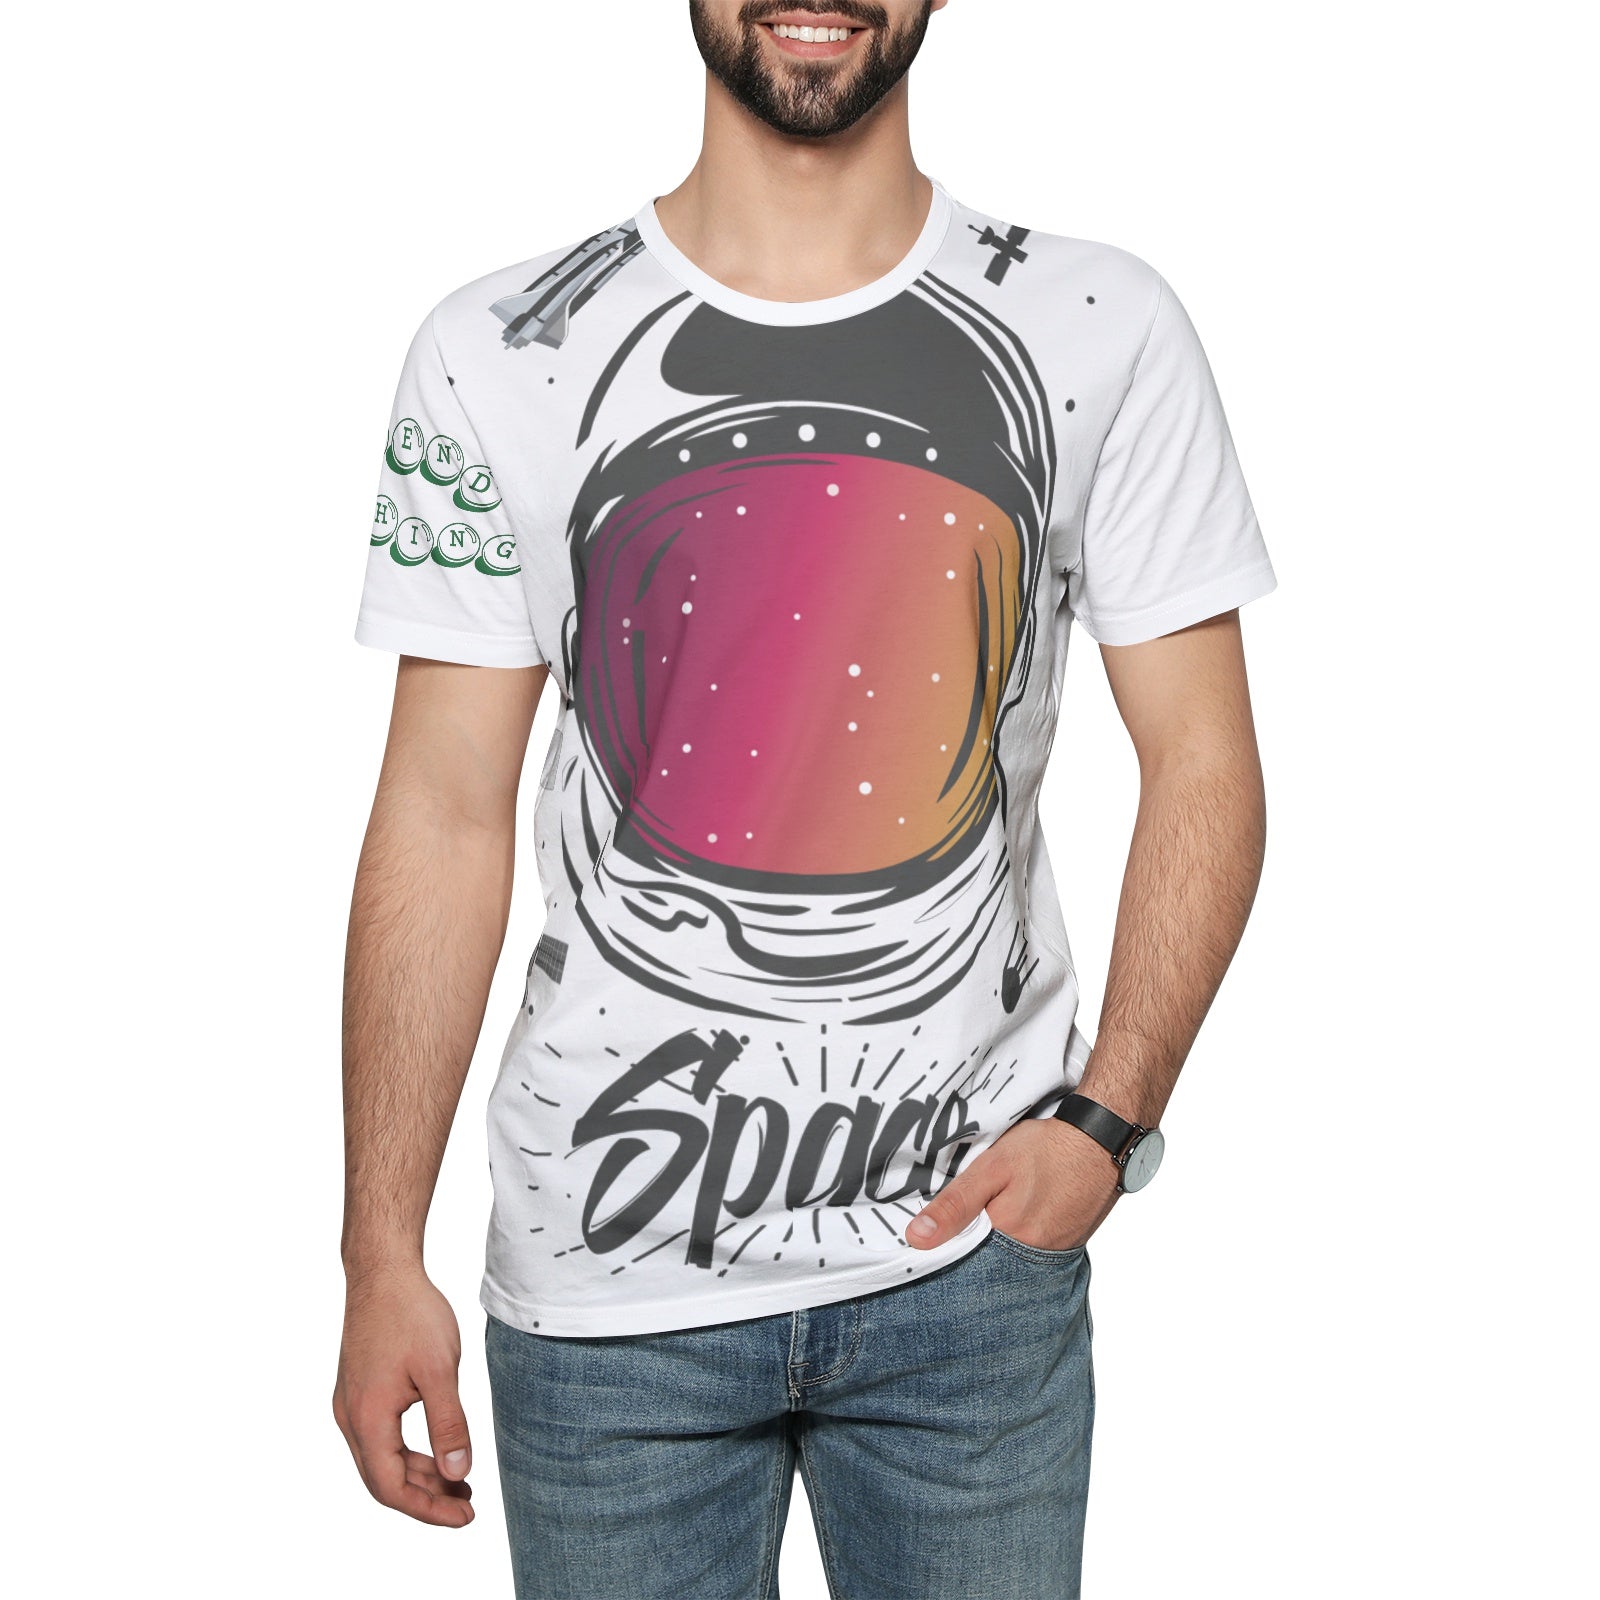 Unisex All-Over Print Cotton T-shirts